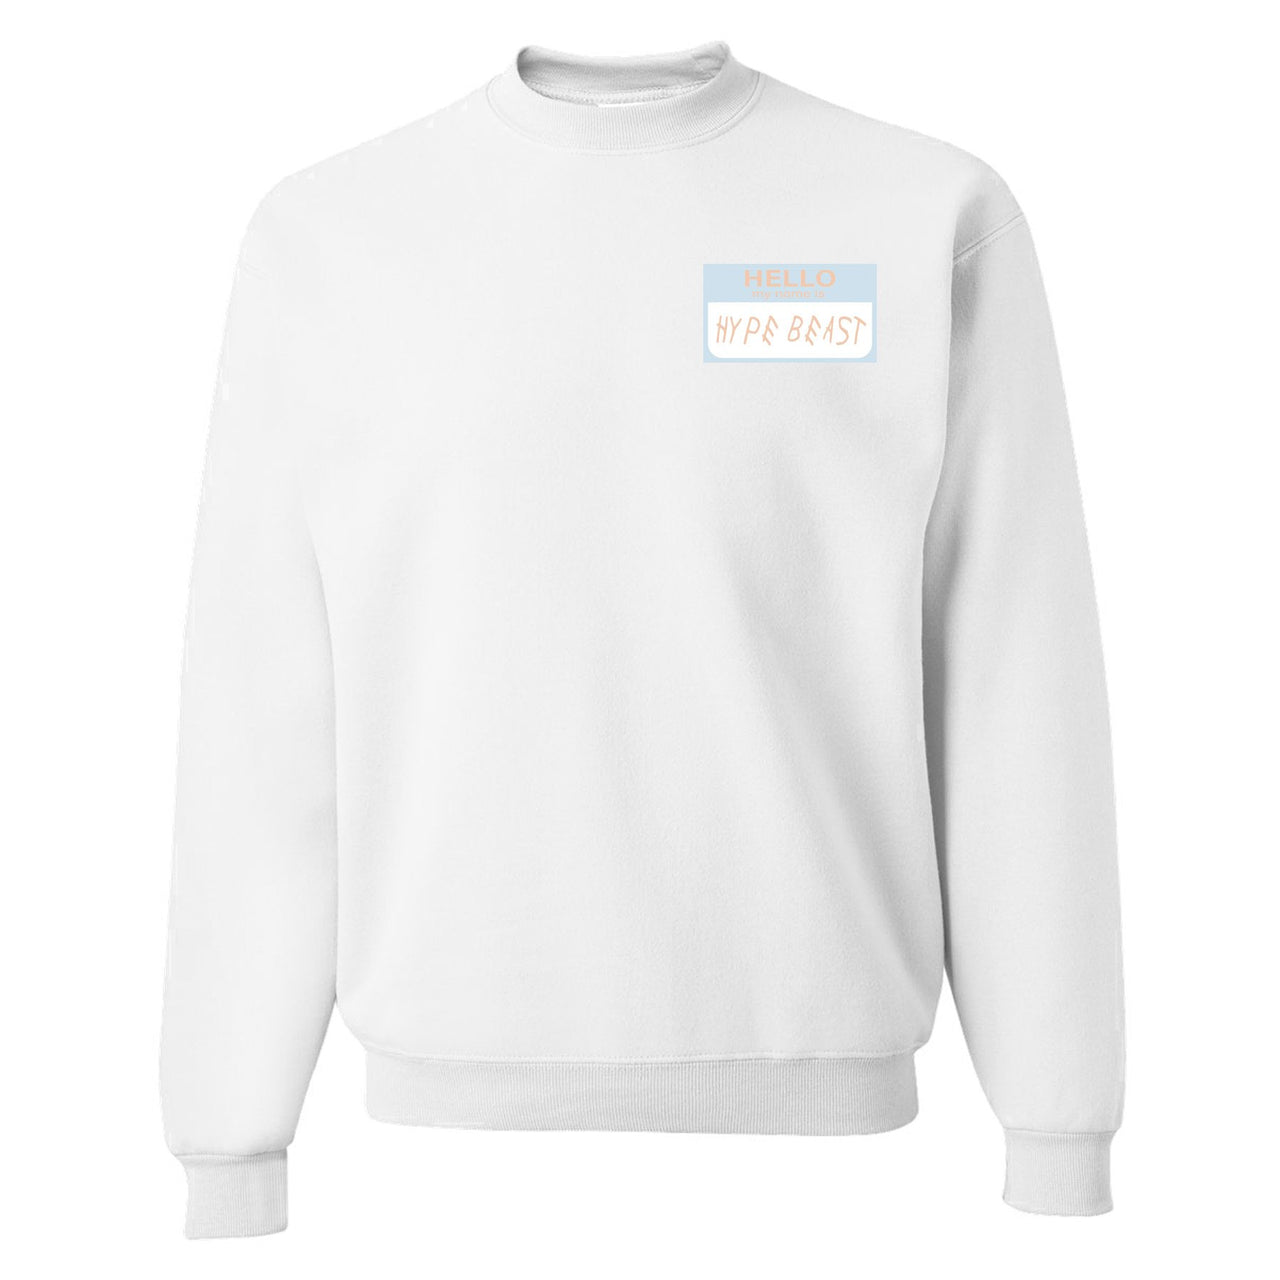 Hyperspace 350s Crewneck Sweater | Hello My Name Is Hype Beast Woe, White